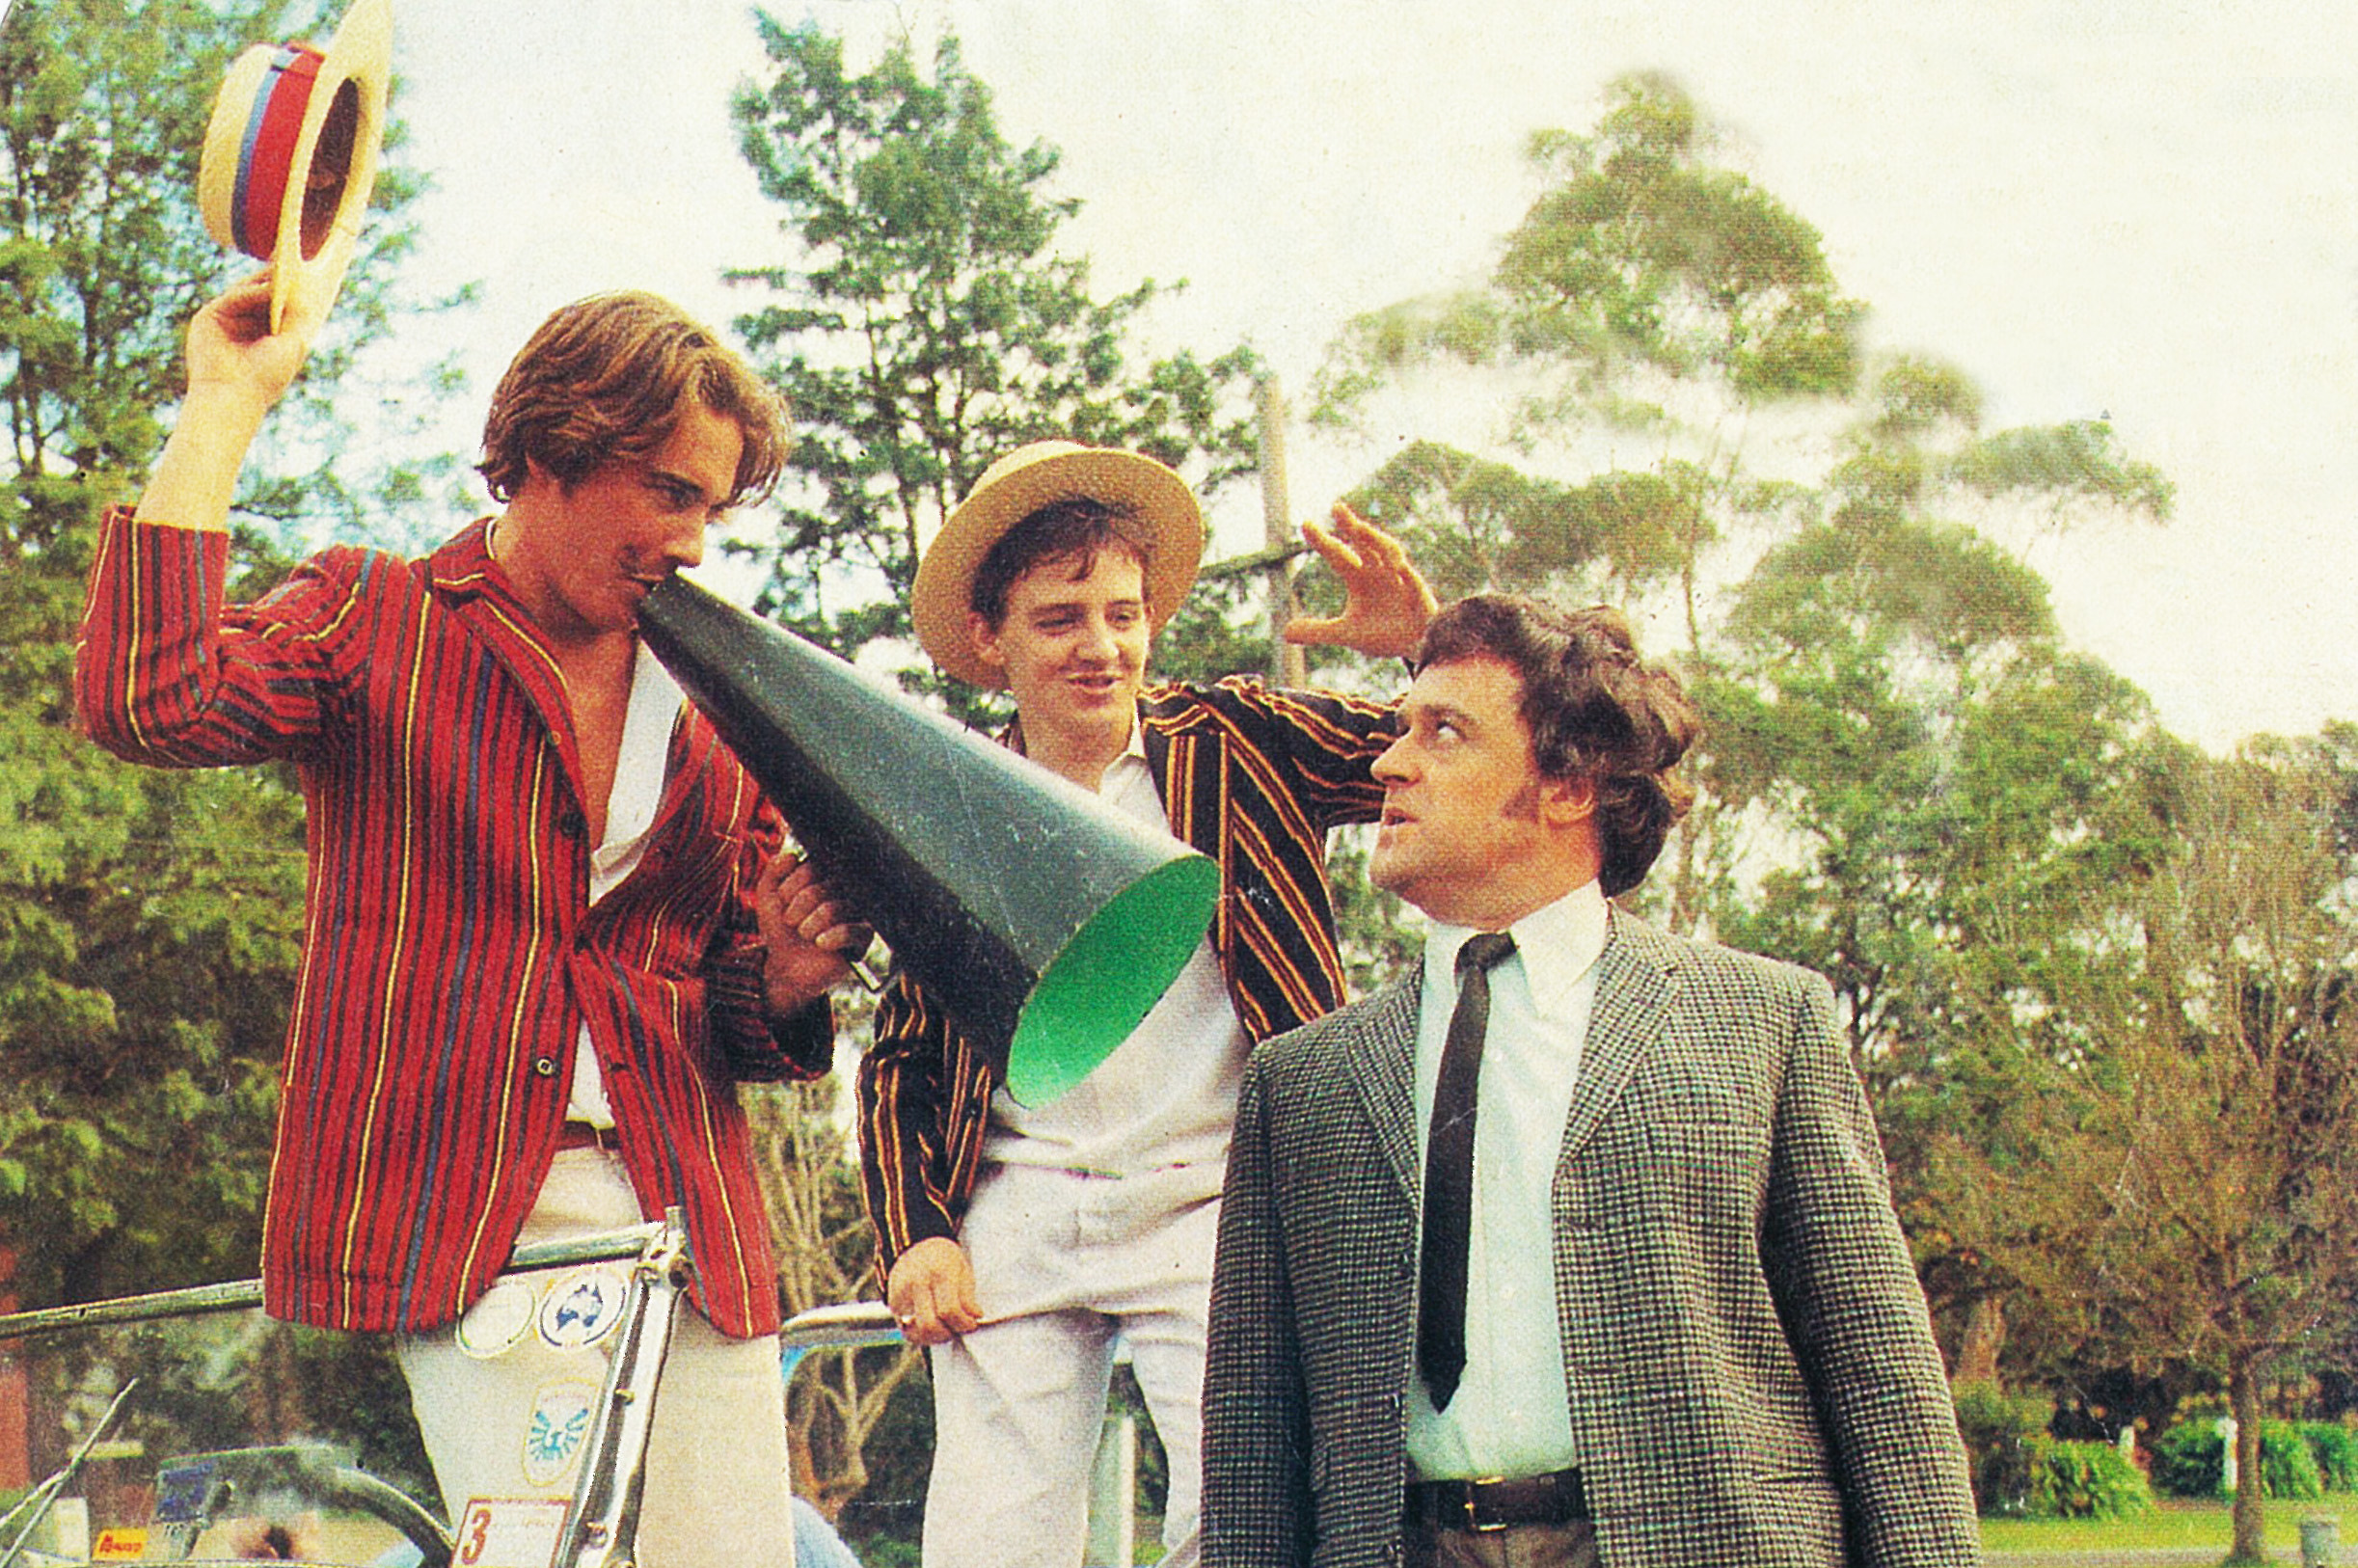 Still from the telemovie A WILD ASS OF A MAN (1980) with Jeremy Kewley, Gary Gartside, Max Gilles.